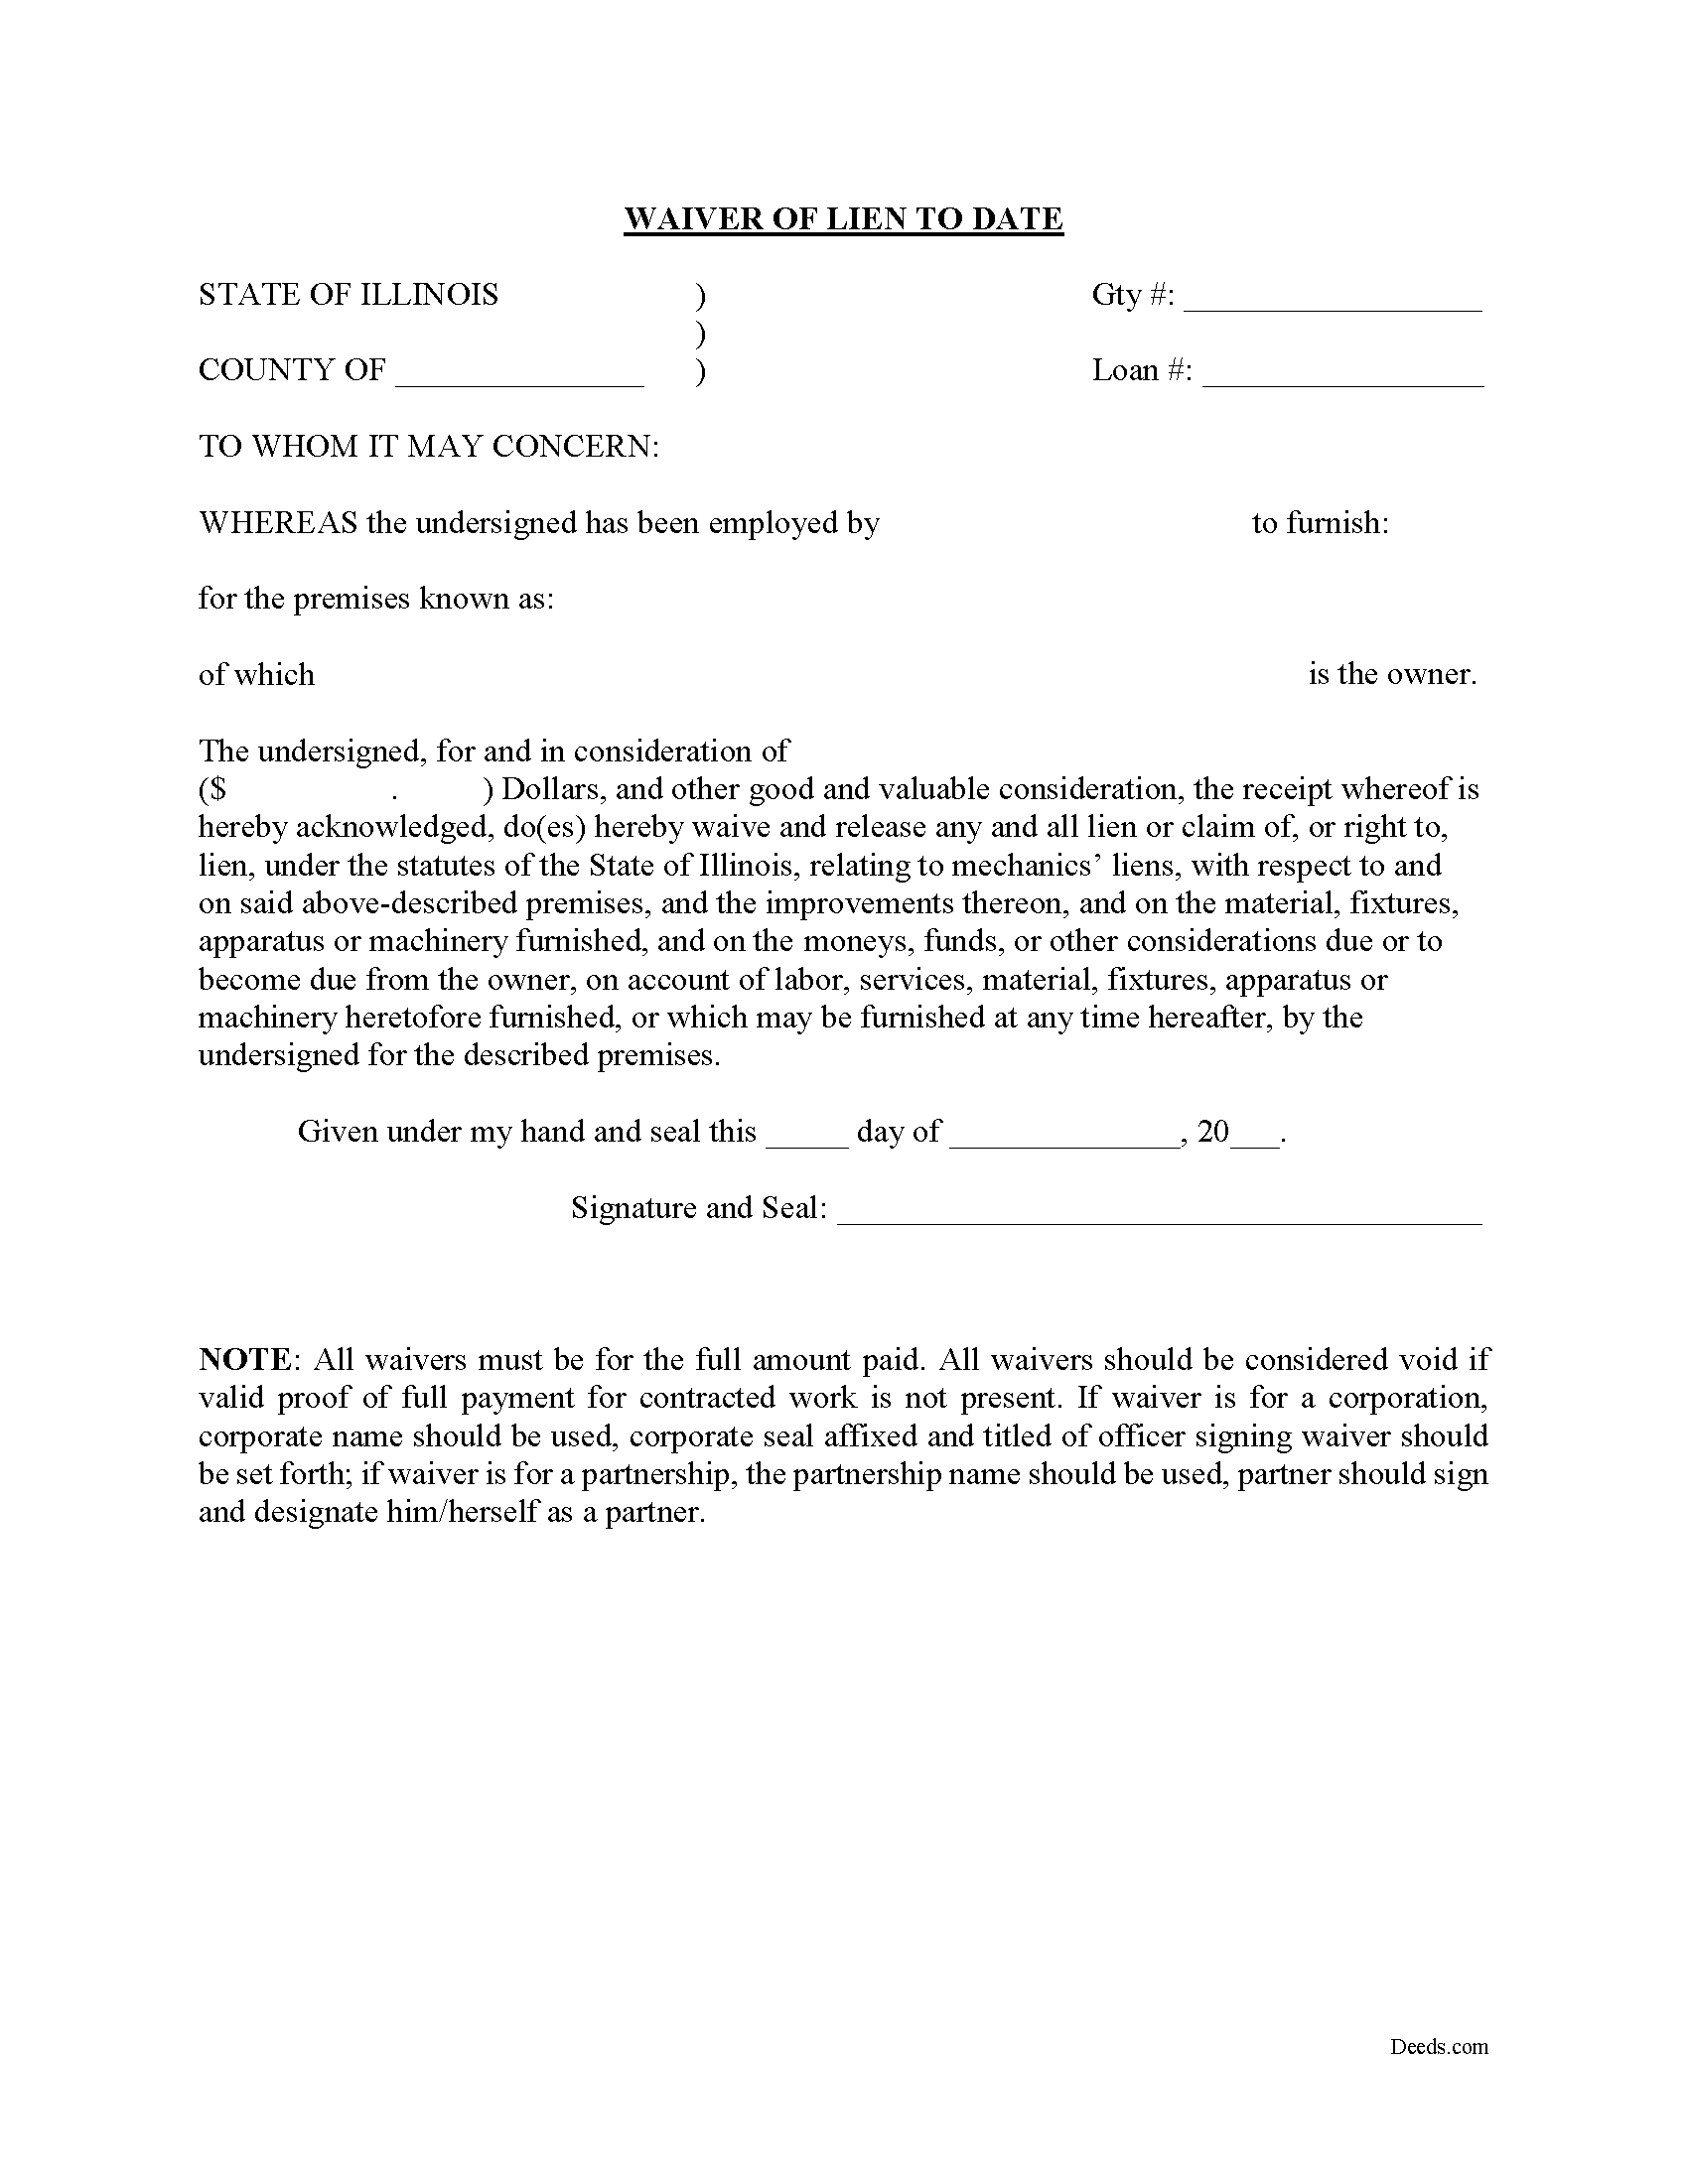 Waiver of Lien to Date